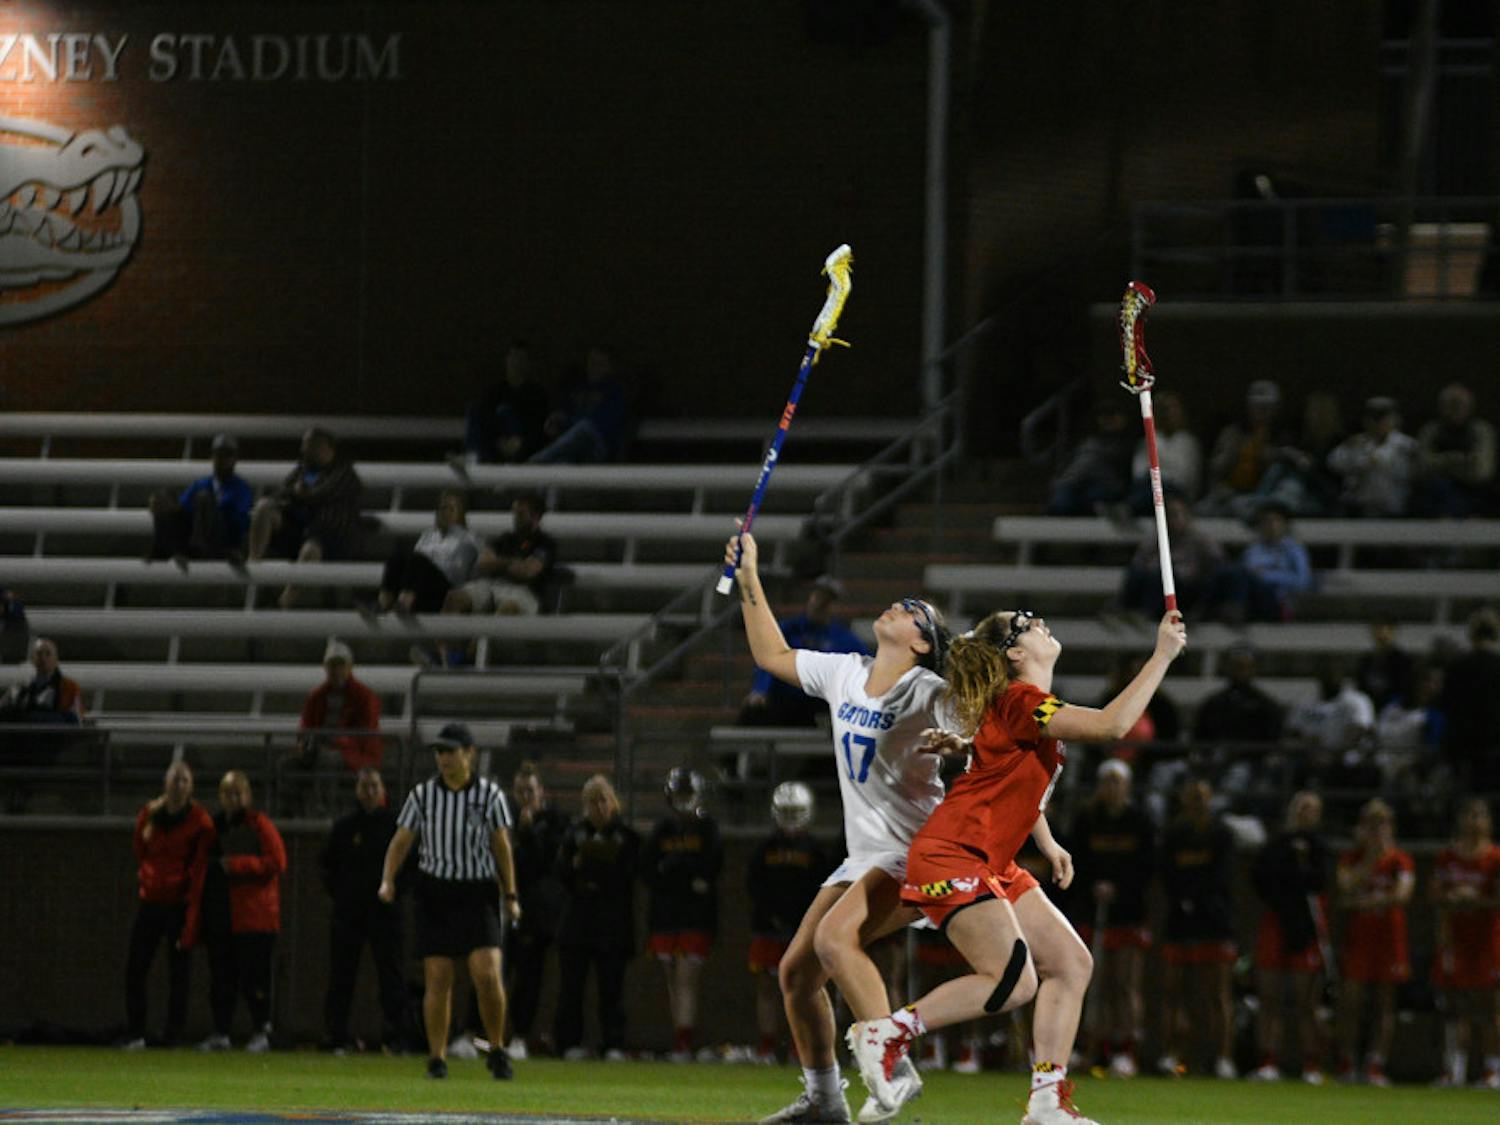 Florida midfielder Shannon Kavanagh (left) is second on the Gators with 24 draw controls this season and is the main option for the draw circle. “The draw circle is where the game is won and lost, for the most part,” coach Amanda O’Leary said. 